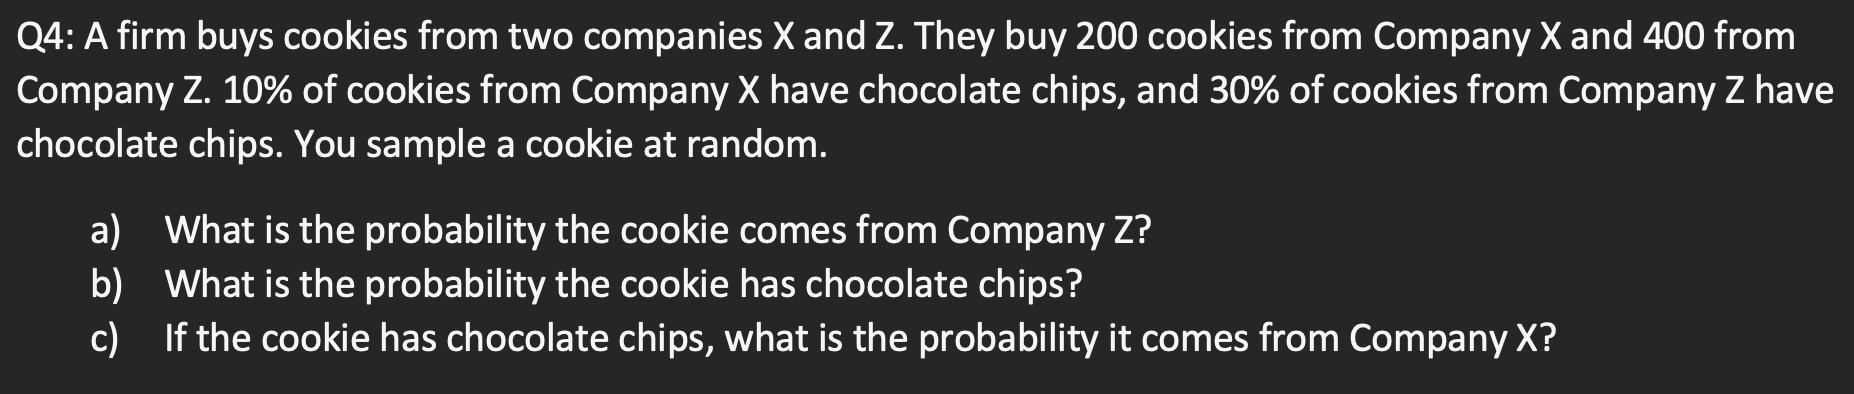 Q4 A Firm Buys Cookies From Two Companies X And Z They Buy 200 Cookies From Company X And 400 From Company Z 10 Of C 1